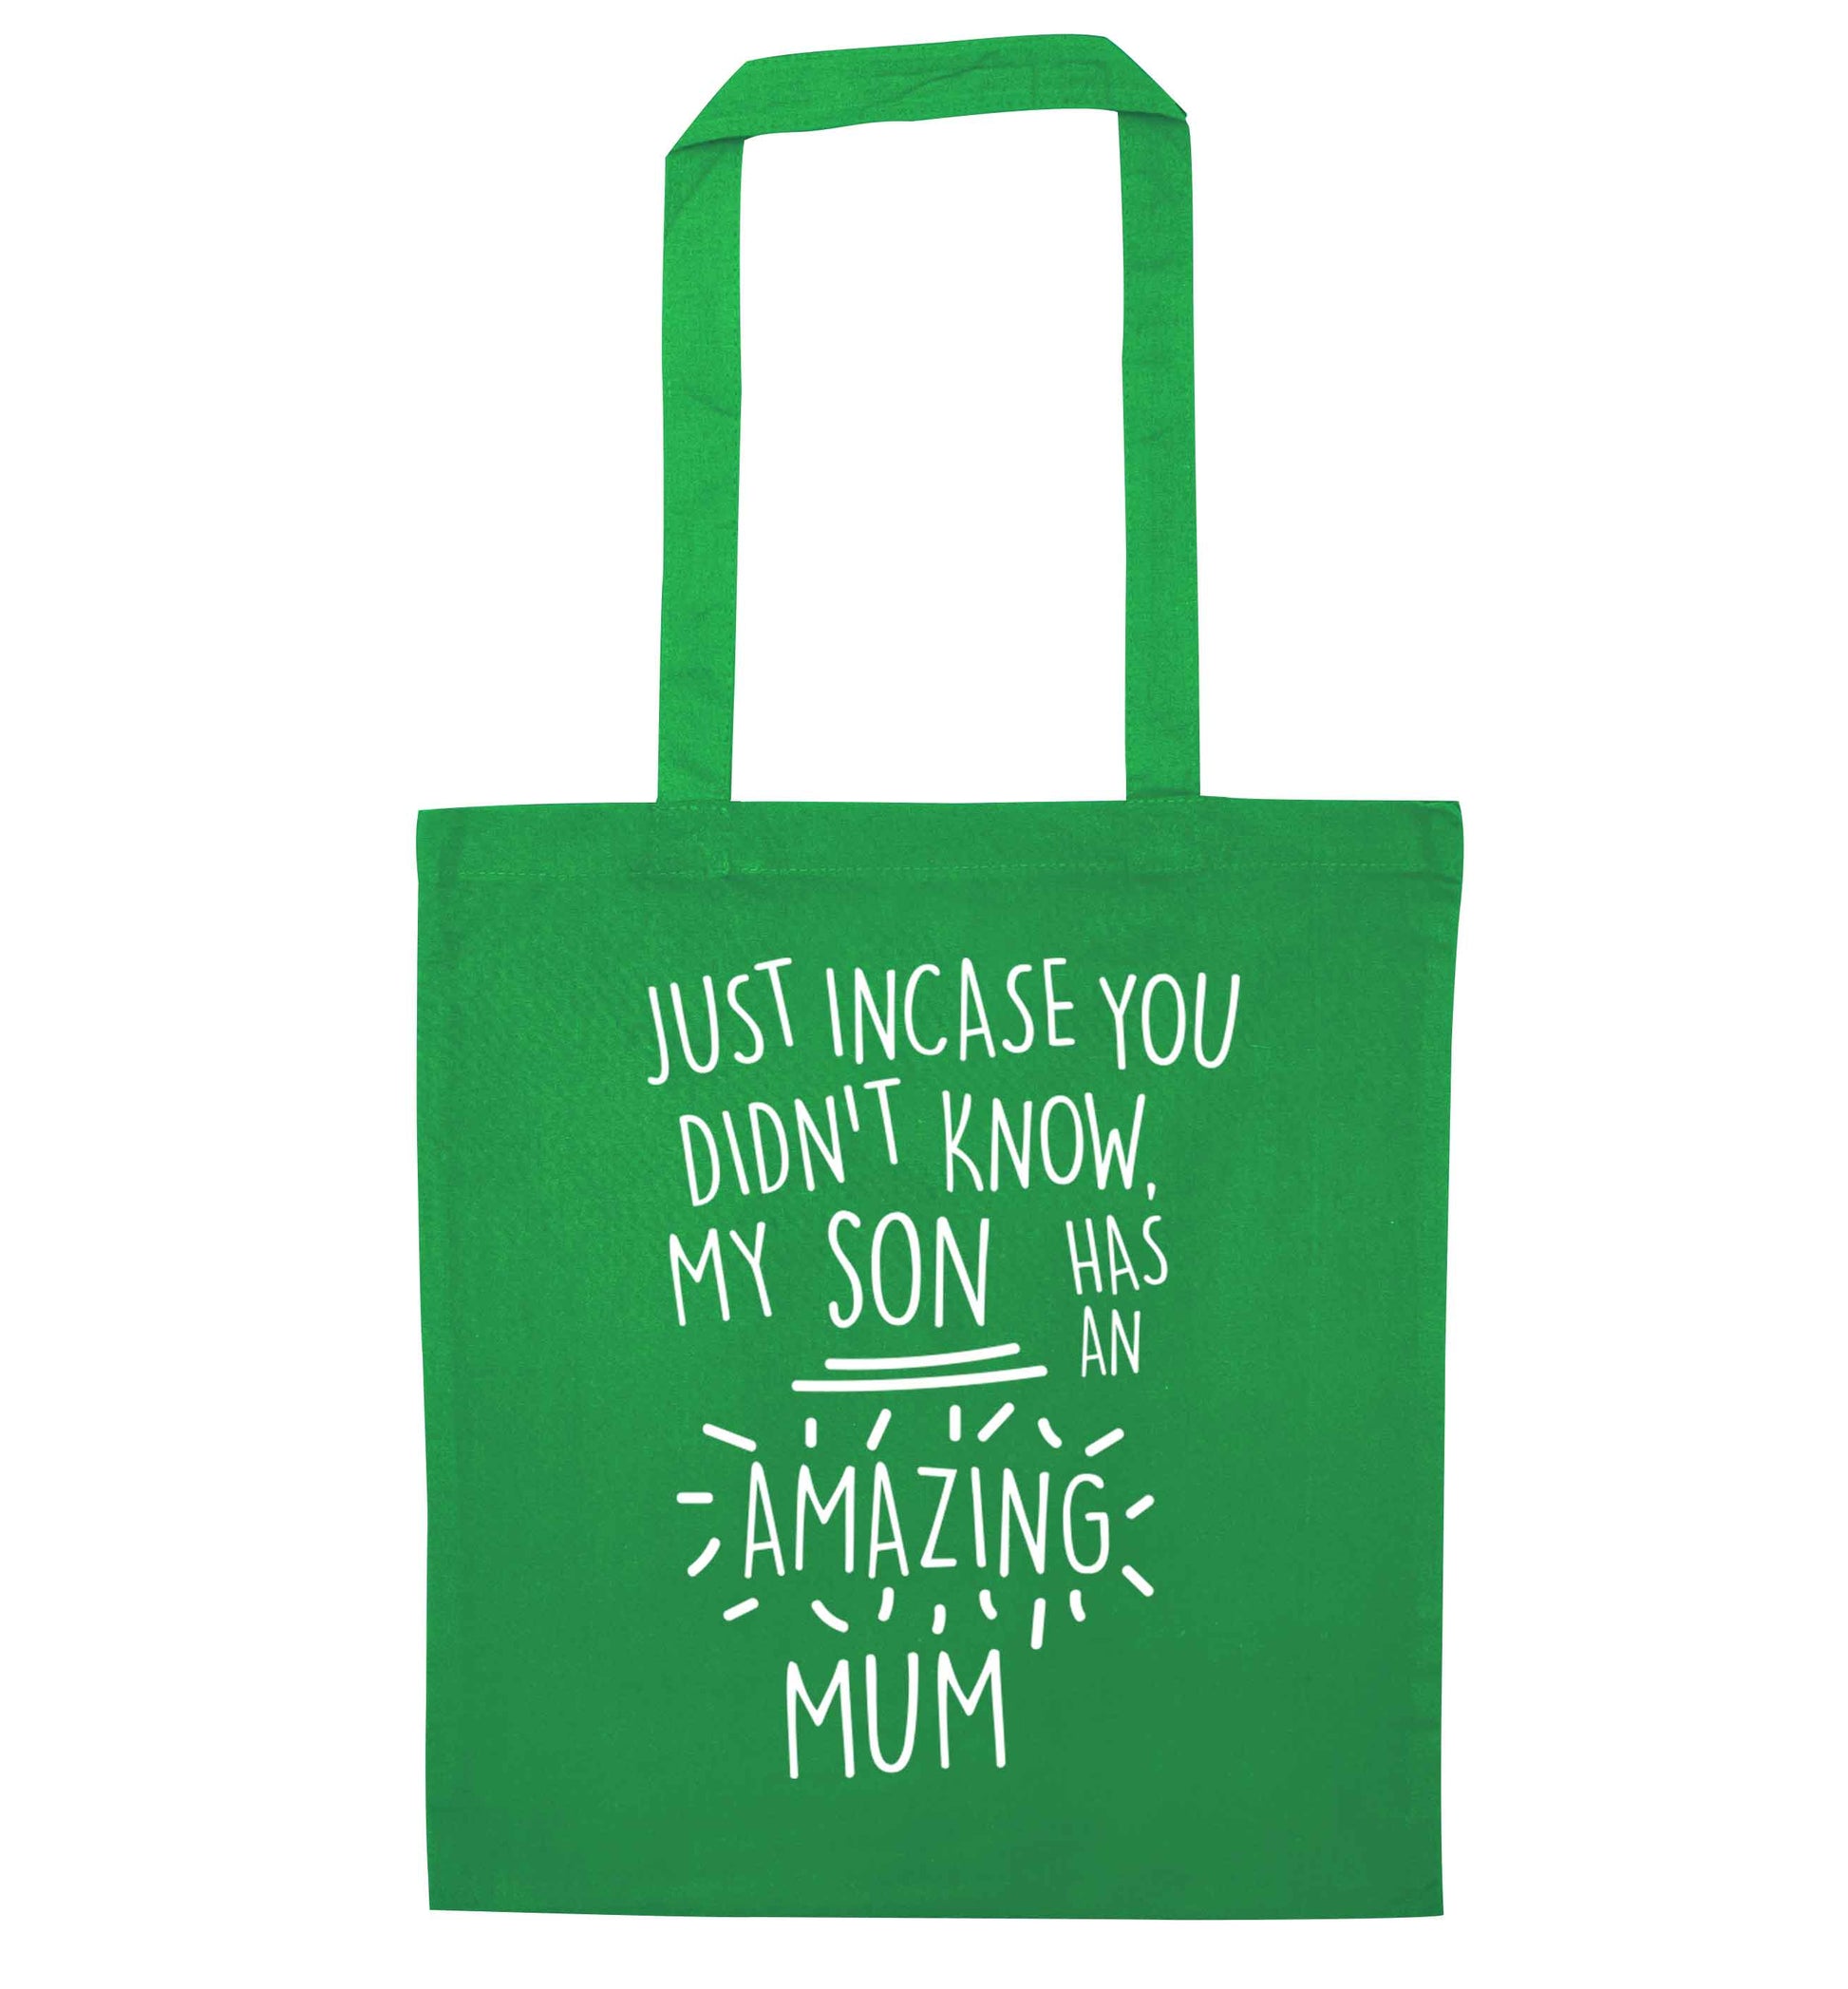 Just incase you didn't know my son has an amazing mum green tote bag